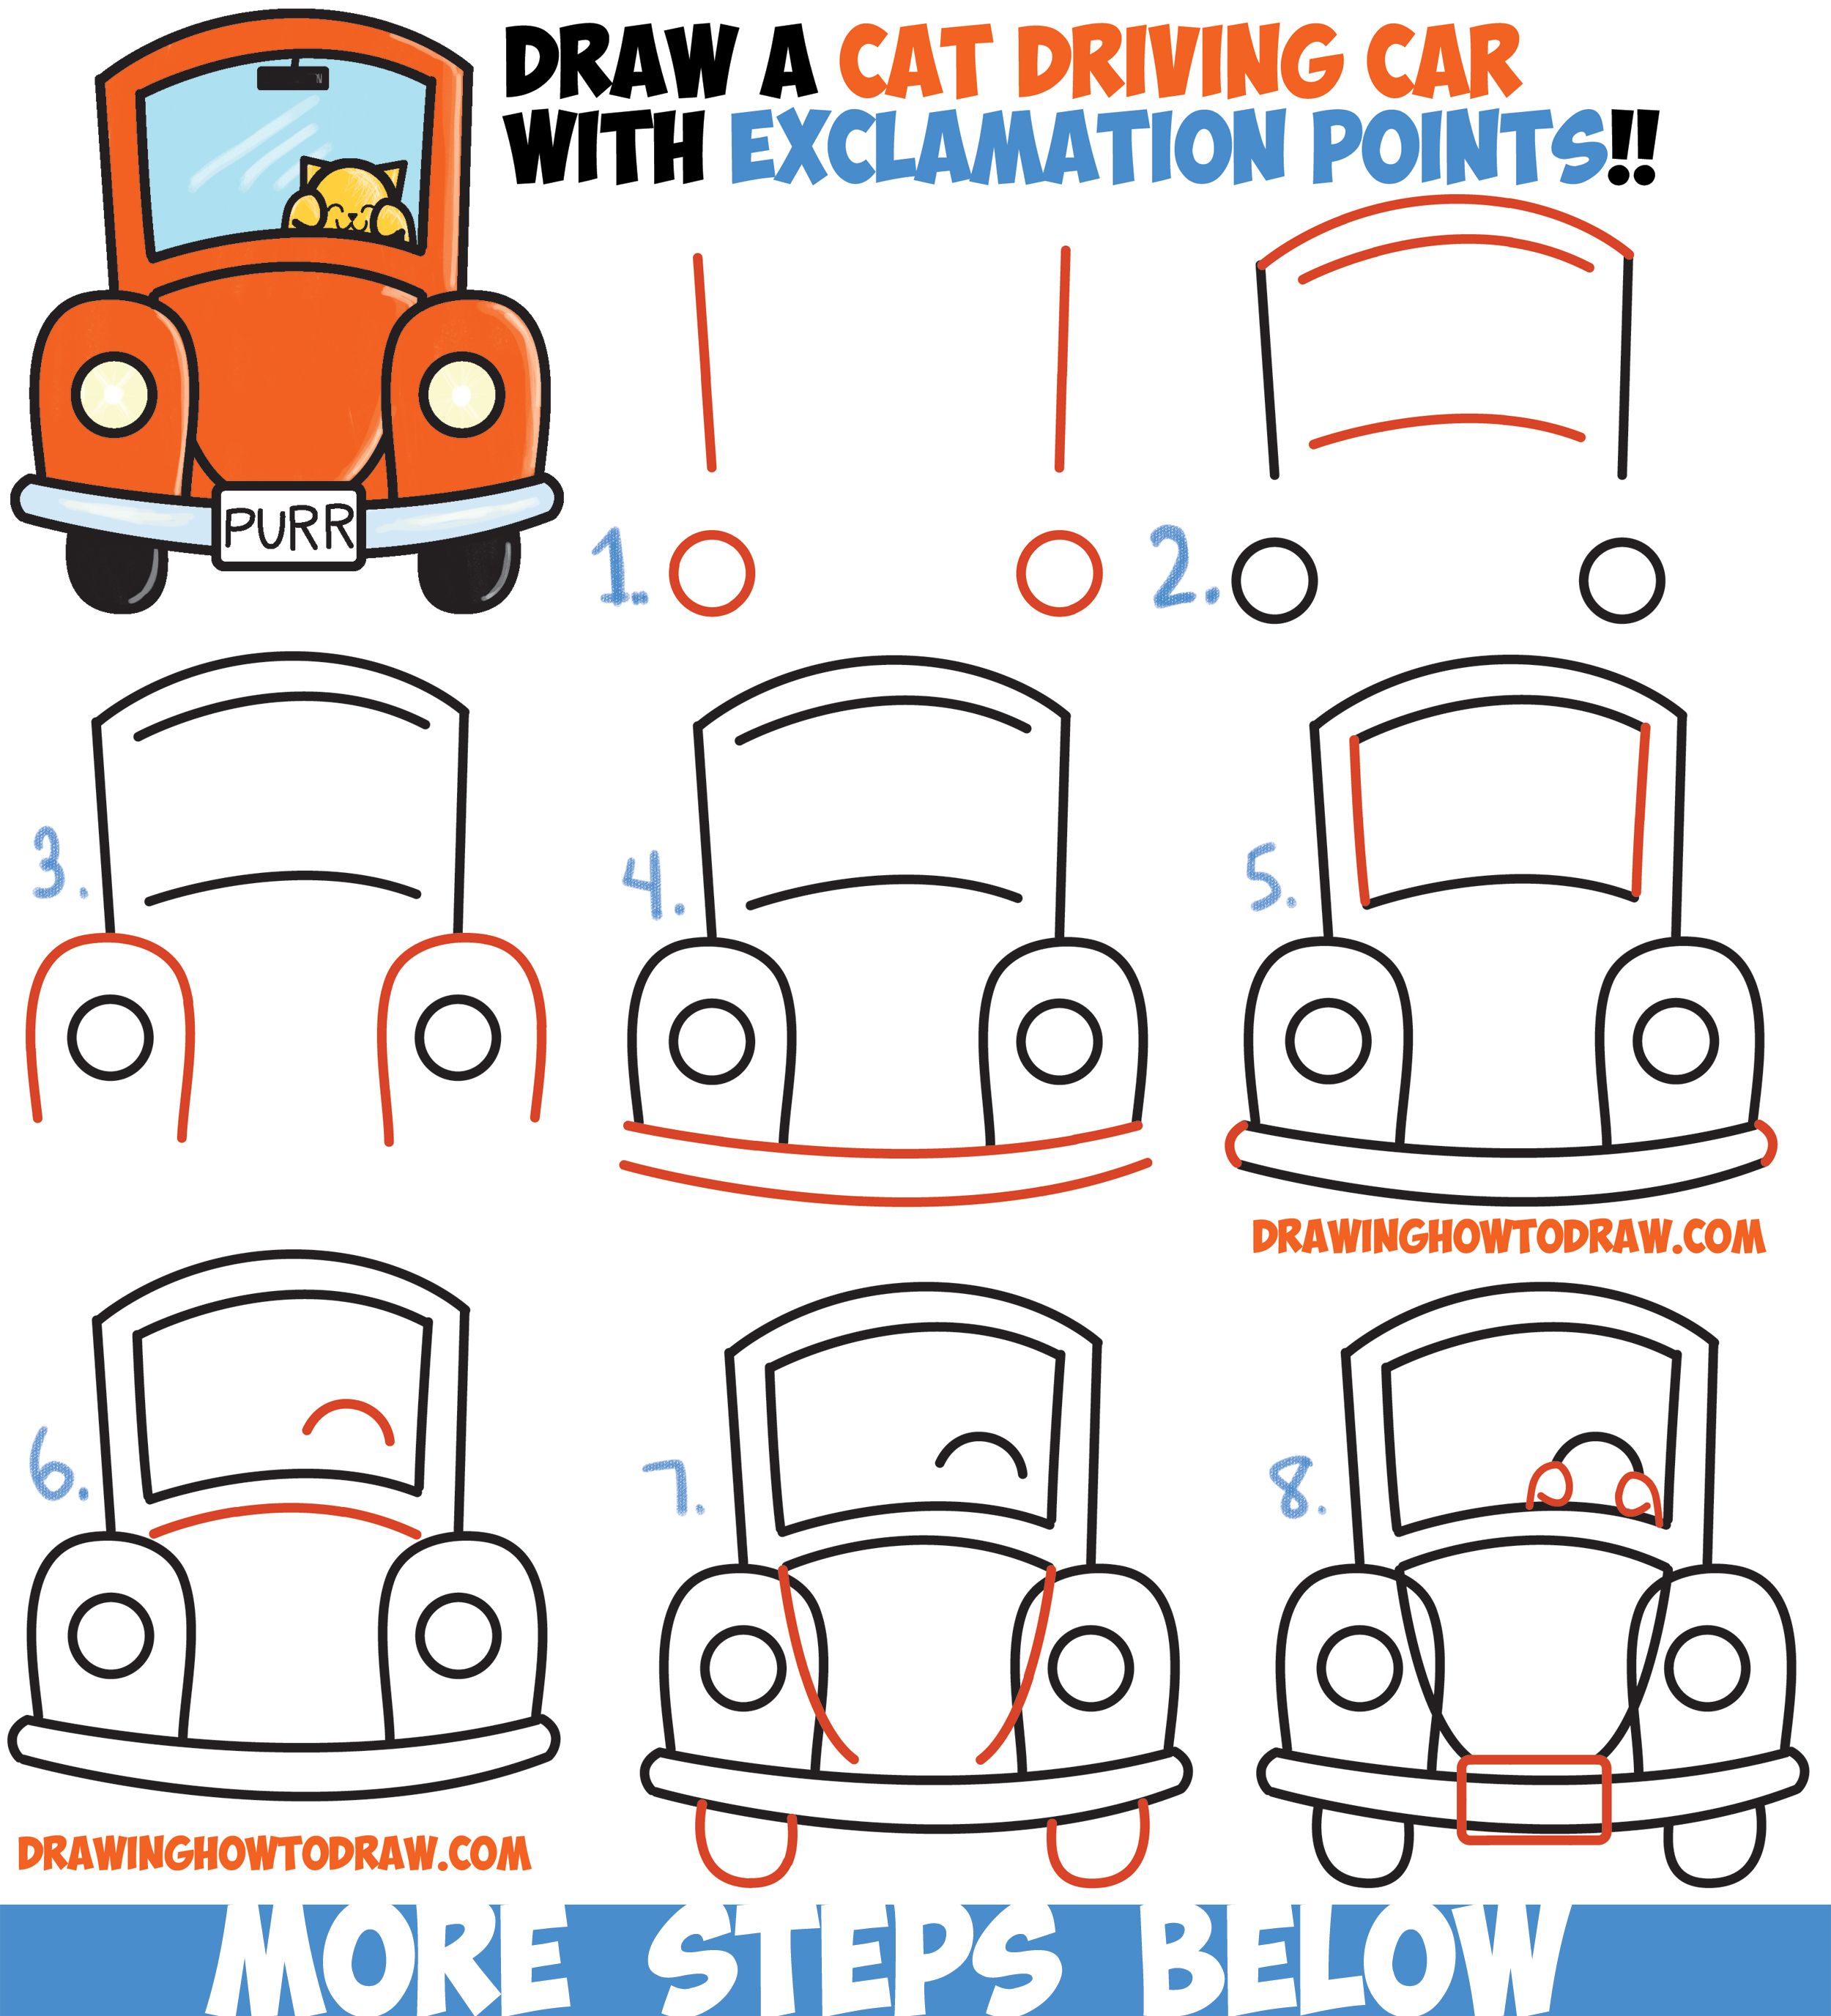 How to Draw Cute Cartoon Cat Driving a Car from Exclamation Points Easy Step by Step Drawing Tutorial for Kids – How to Draw Step by Step Drawing Tutorials